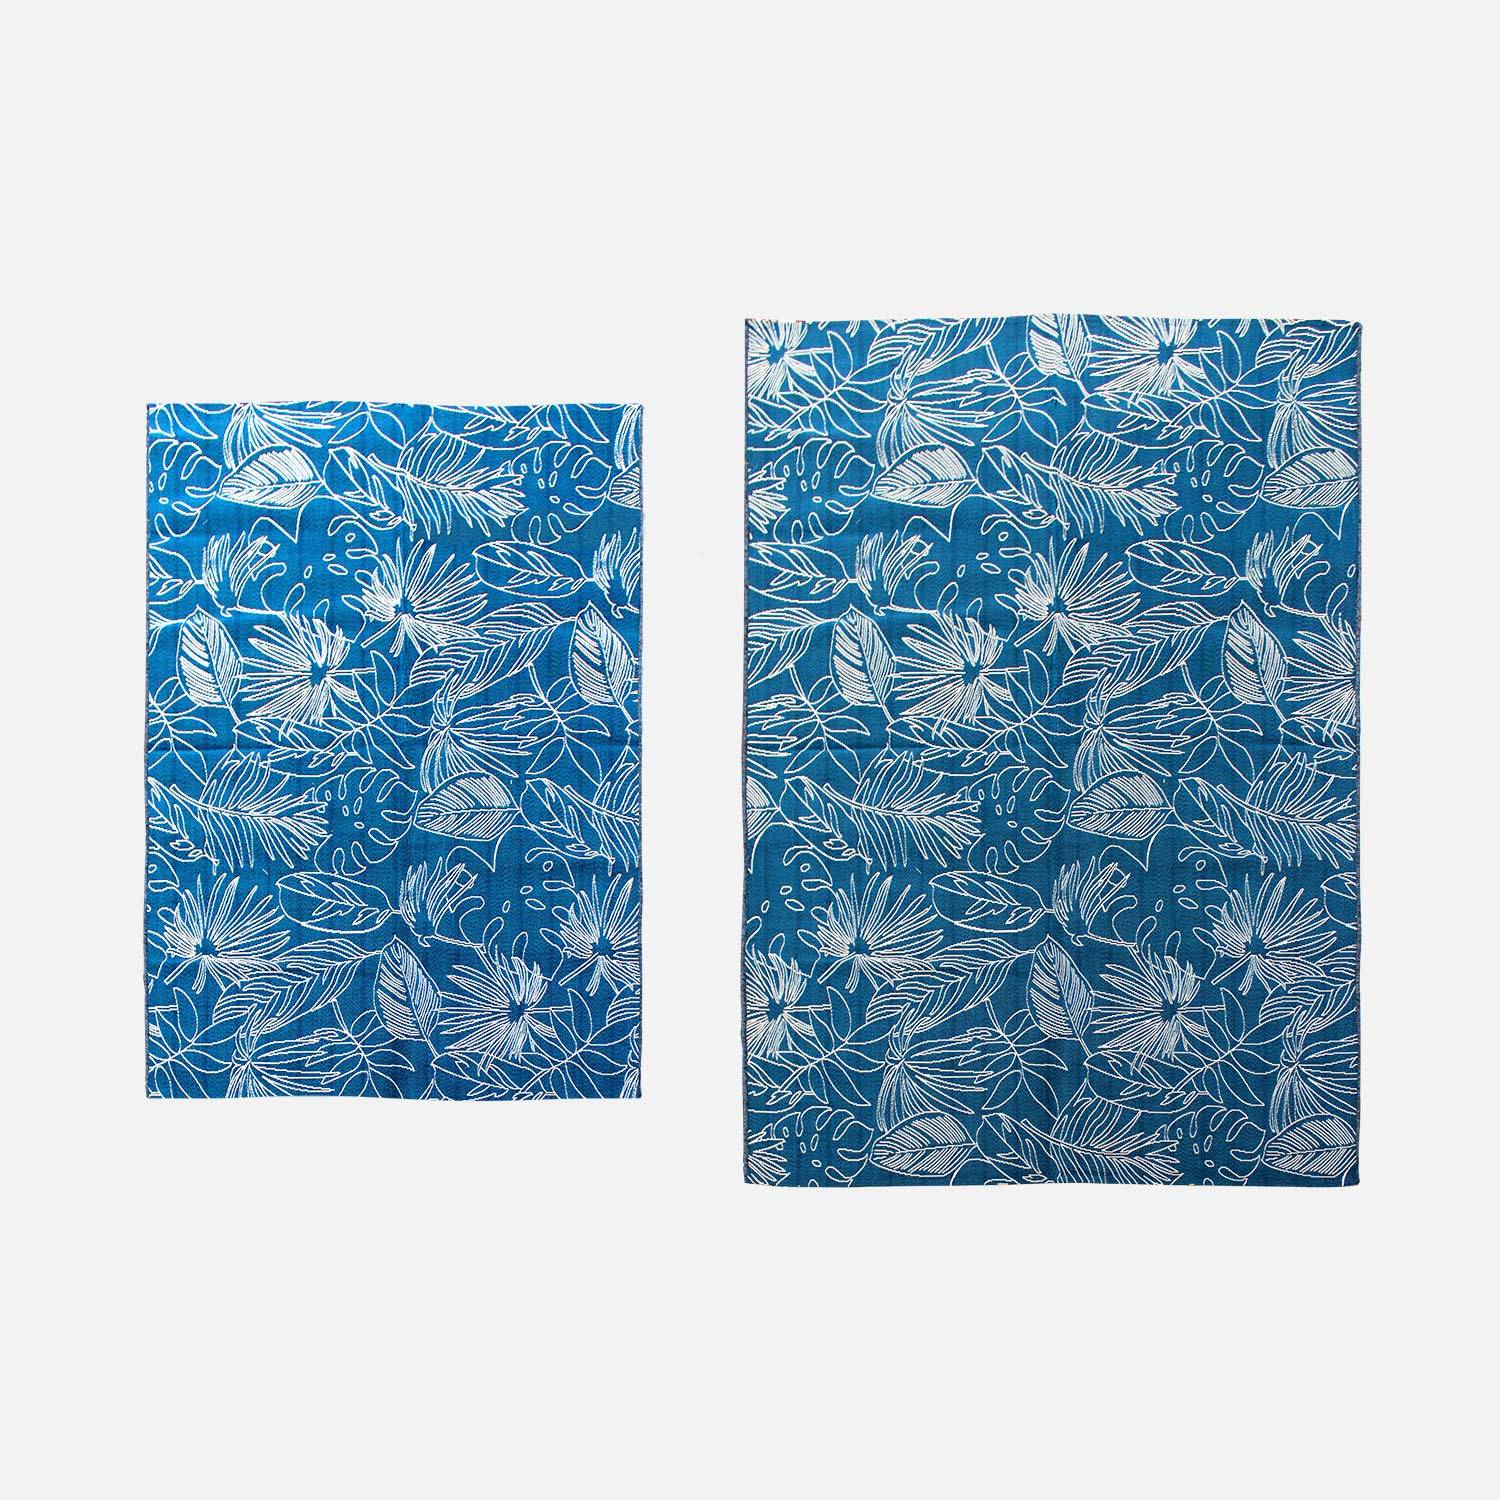 Outdoor rug - 200x290cm - rectangular, indoor/outdoor use - Exotic - Blue and white Photo3